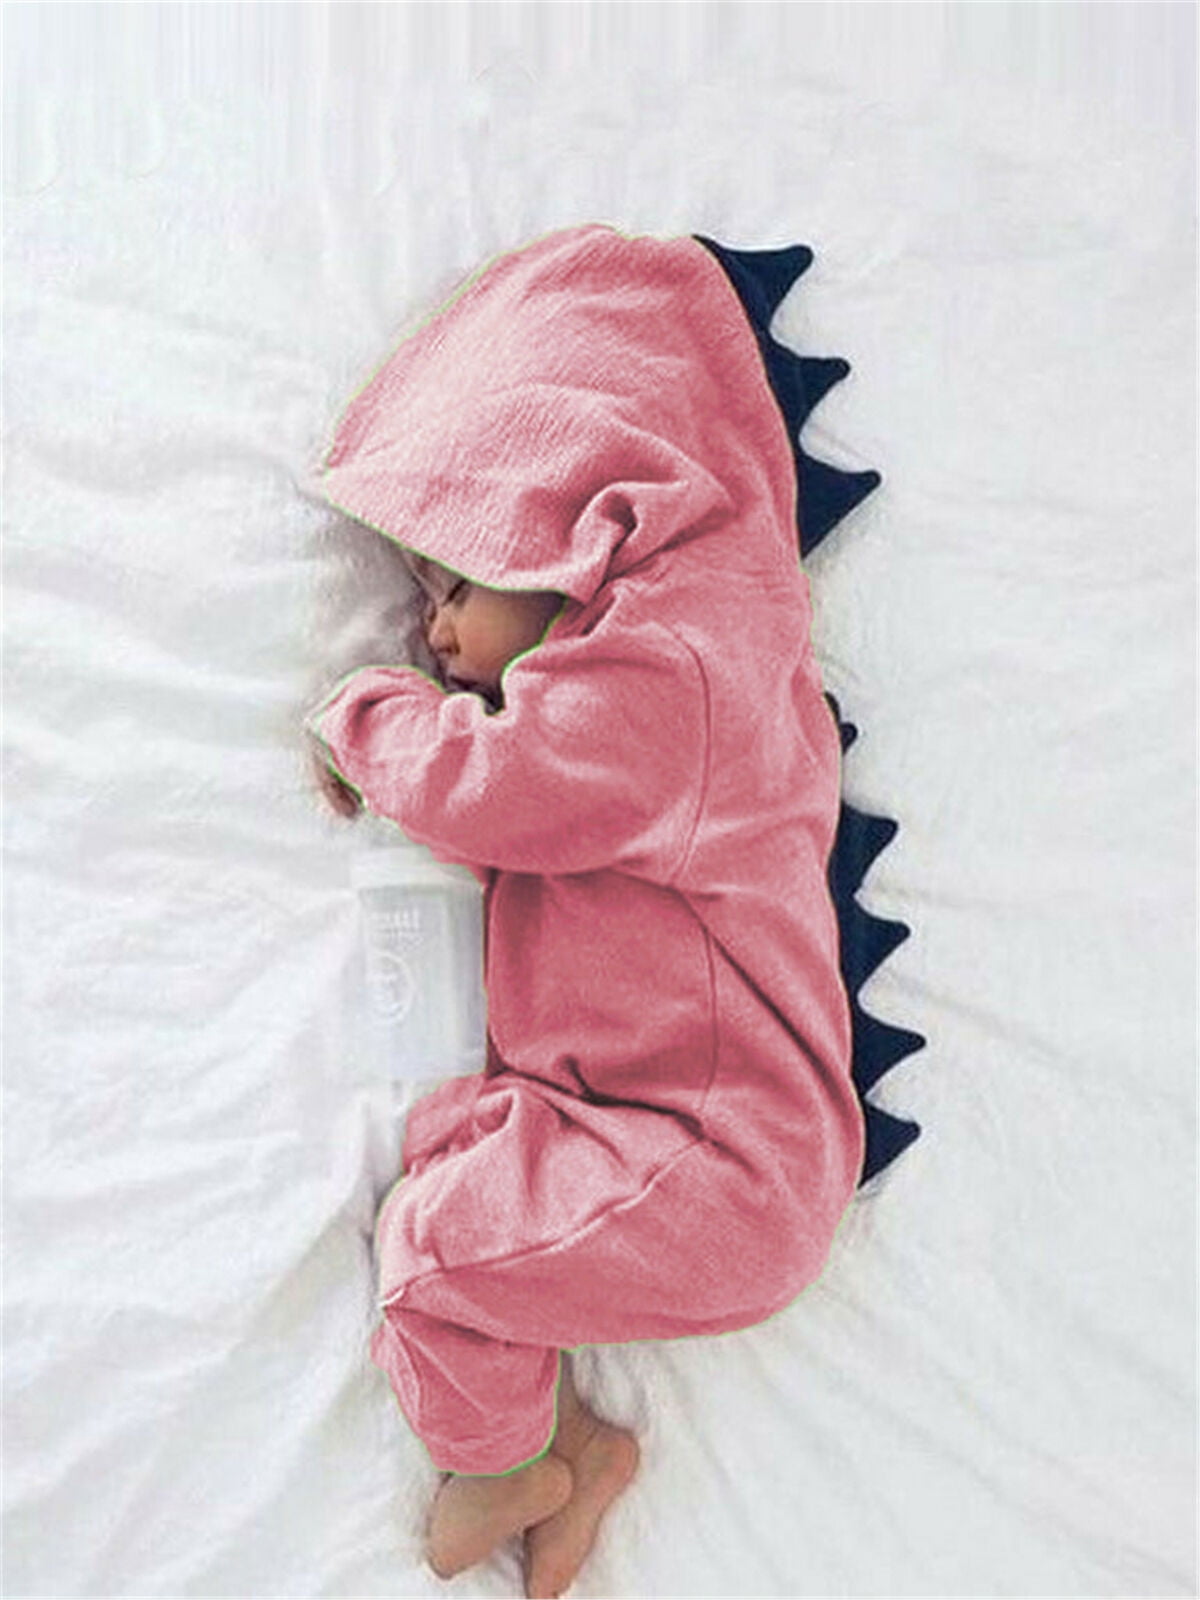 One-piece New-born Baby Infant Boys Girl Romper Hoodie Jumpsuit Bodysuit Clothes